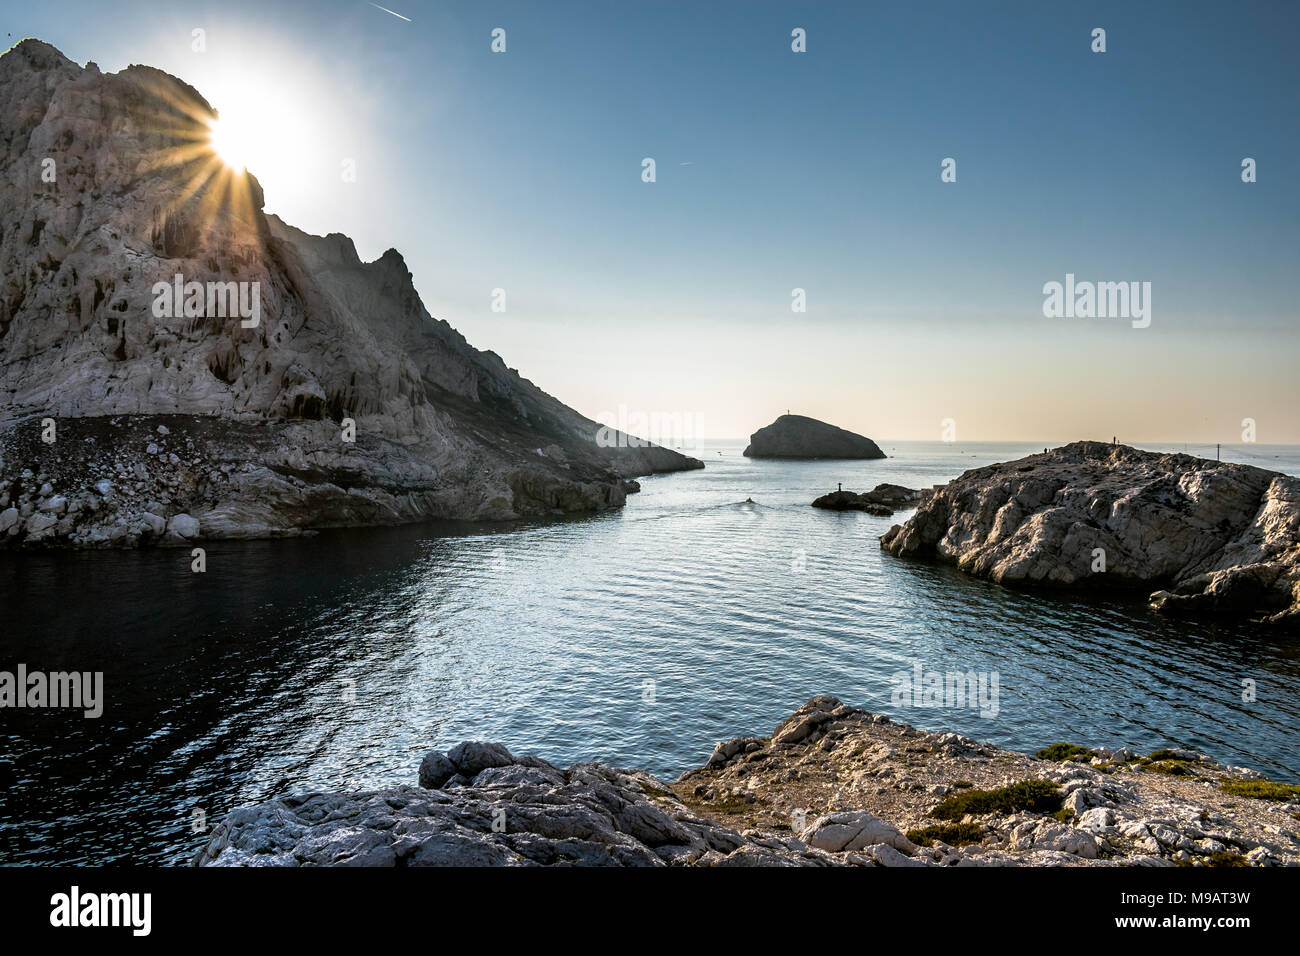 Mediterranean sea view with rocky mountains hiding the rays of the sun under a clear sky in Les calanques, Marseille, France. Stock Photo